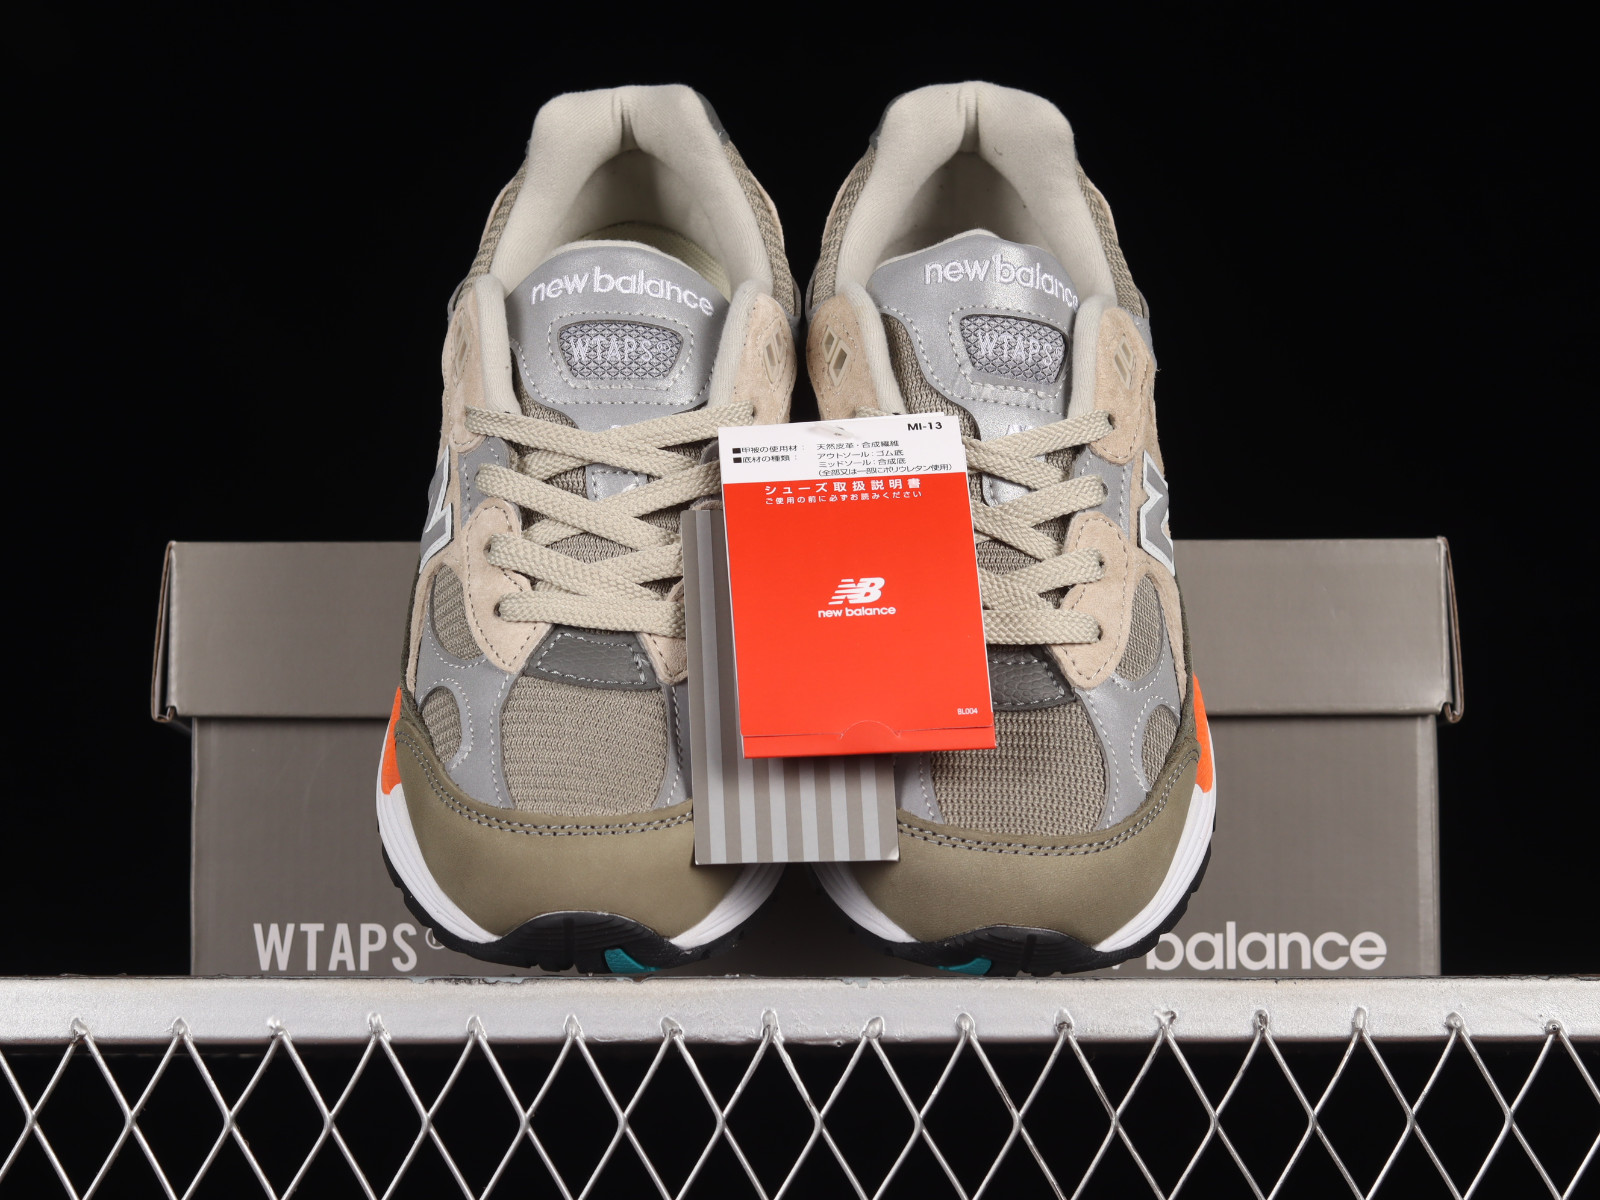 simply trap decorate New balance 6302 olive green white men slip on sandals slippers sd6302ckam  - StclaircomoShops - WTAPS x New Balance 992 Made in USA Olive Drab M992WT